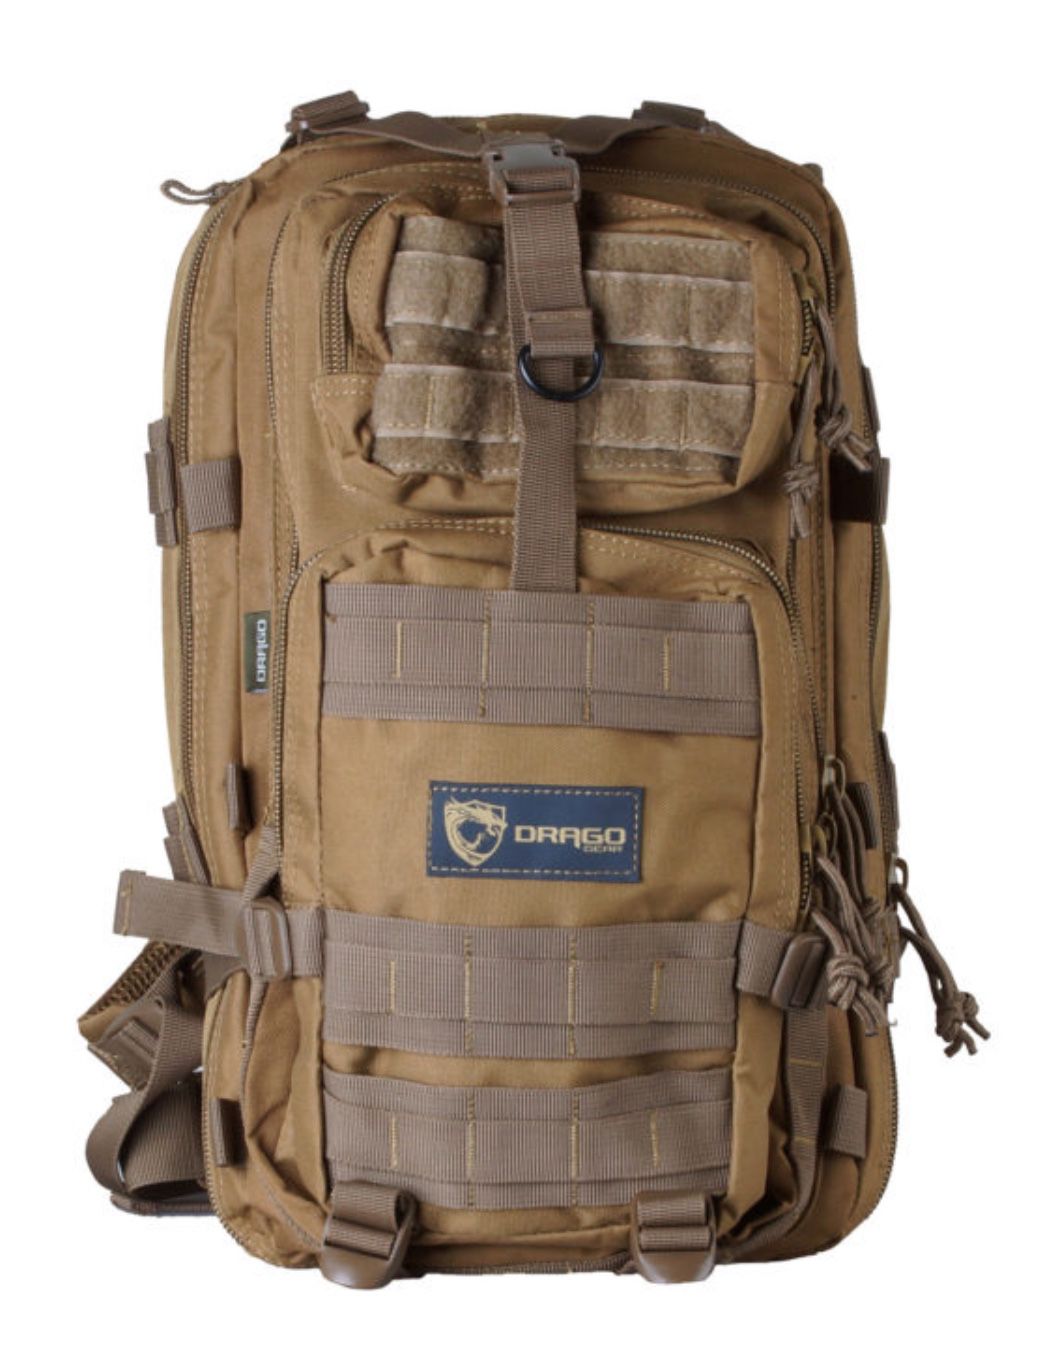 Drago Gear “Tracker” Tactical Backpack - Never Used